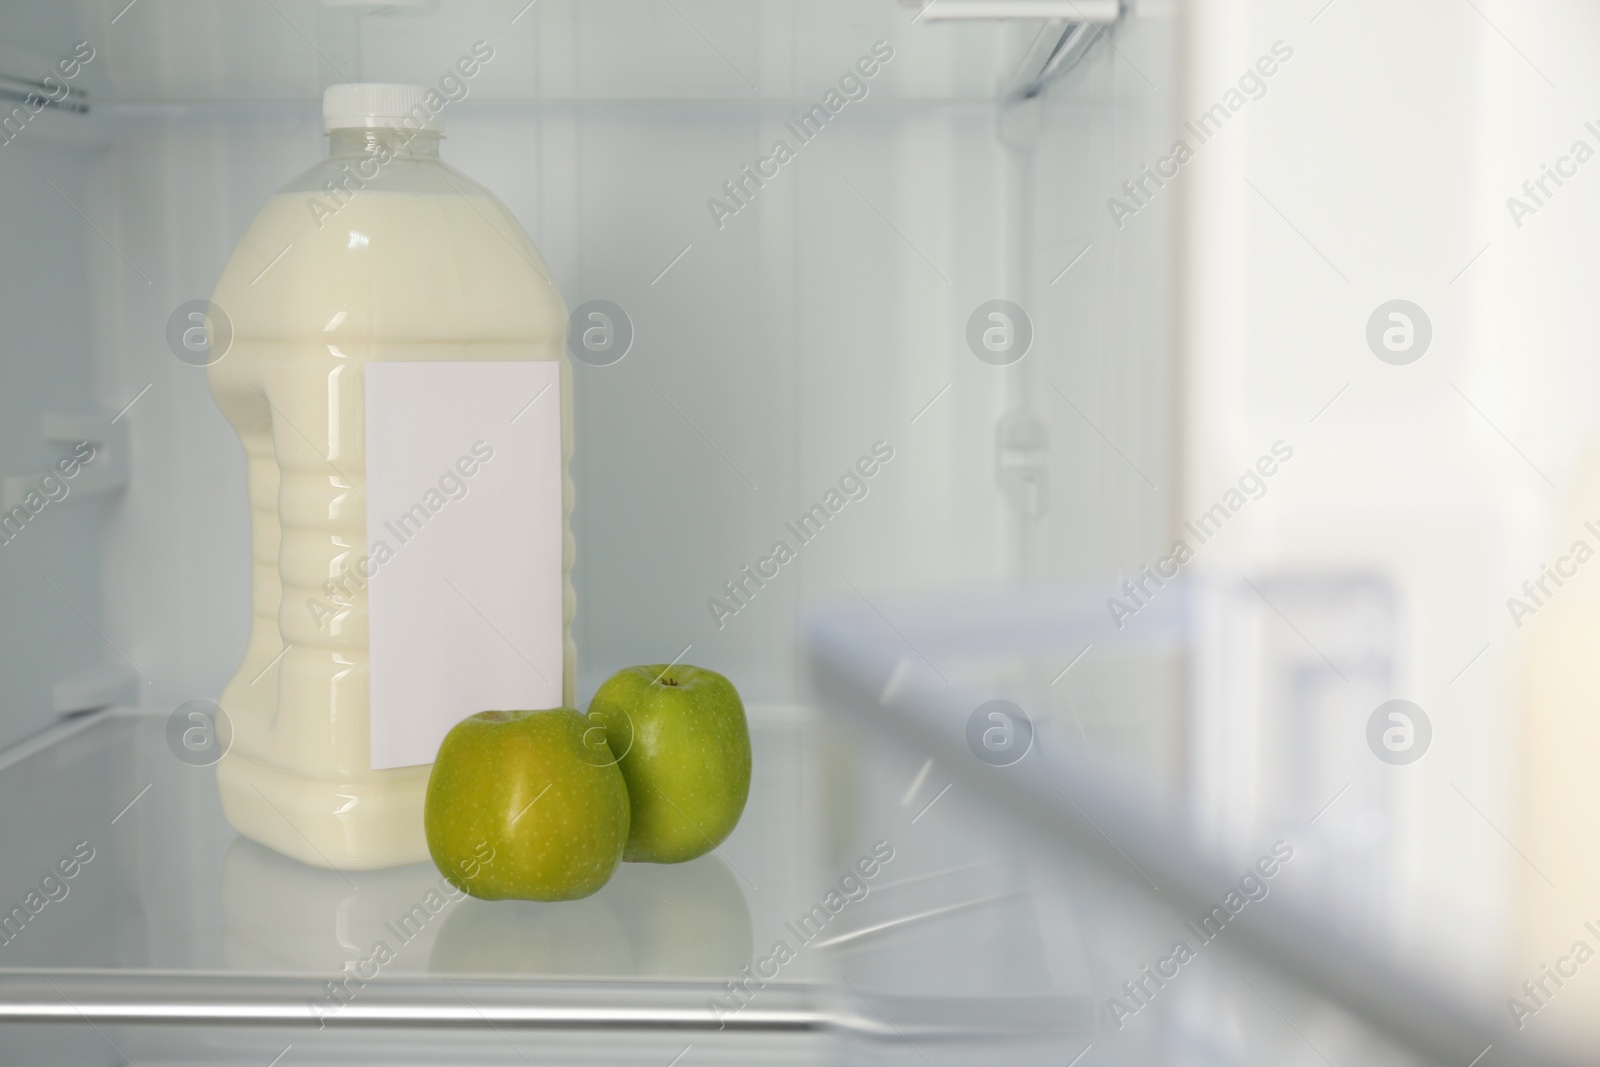 Photo of Gallon of milk and apples n refrigerator, closeup